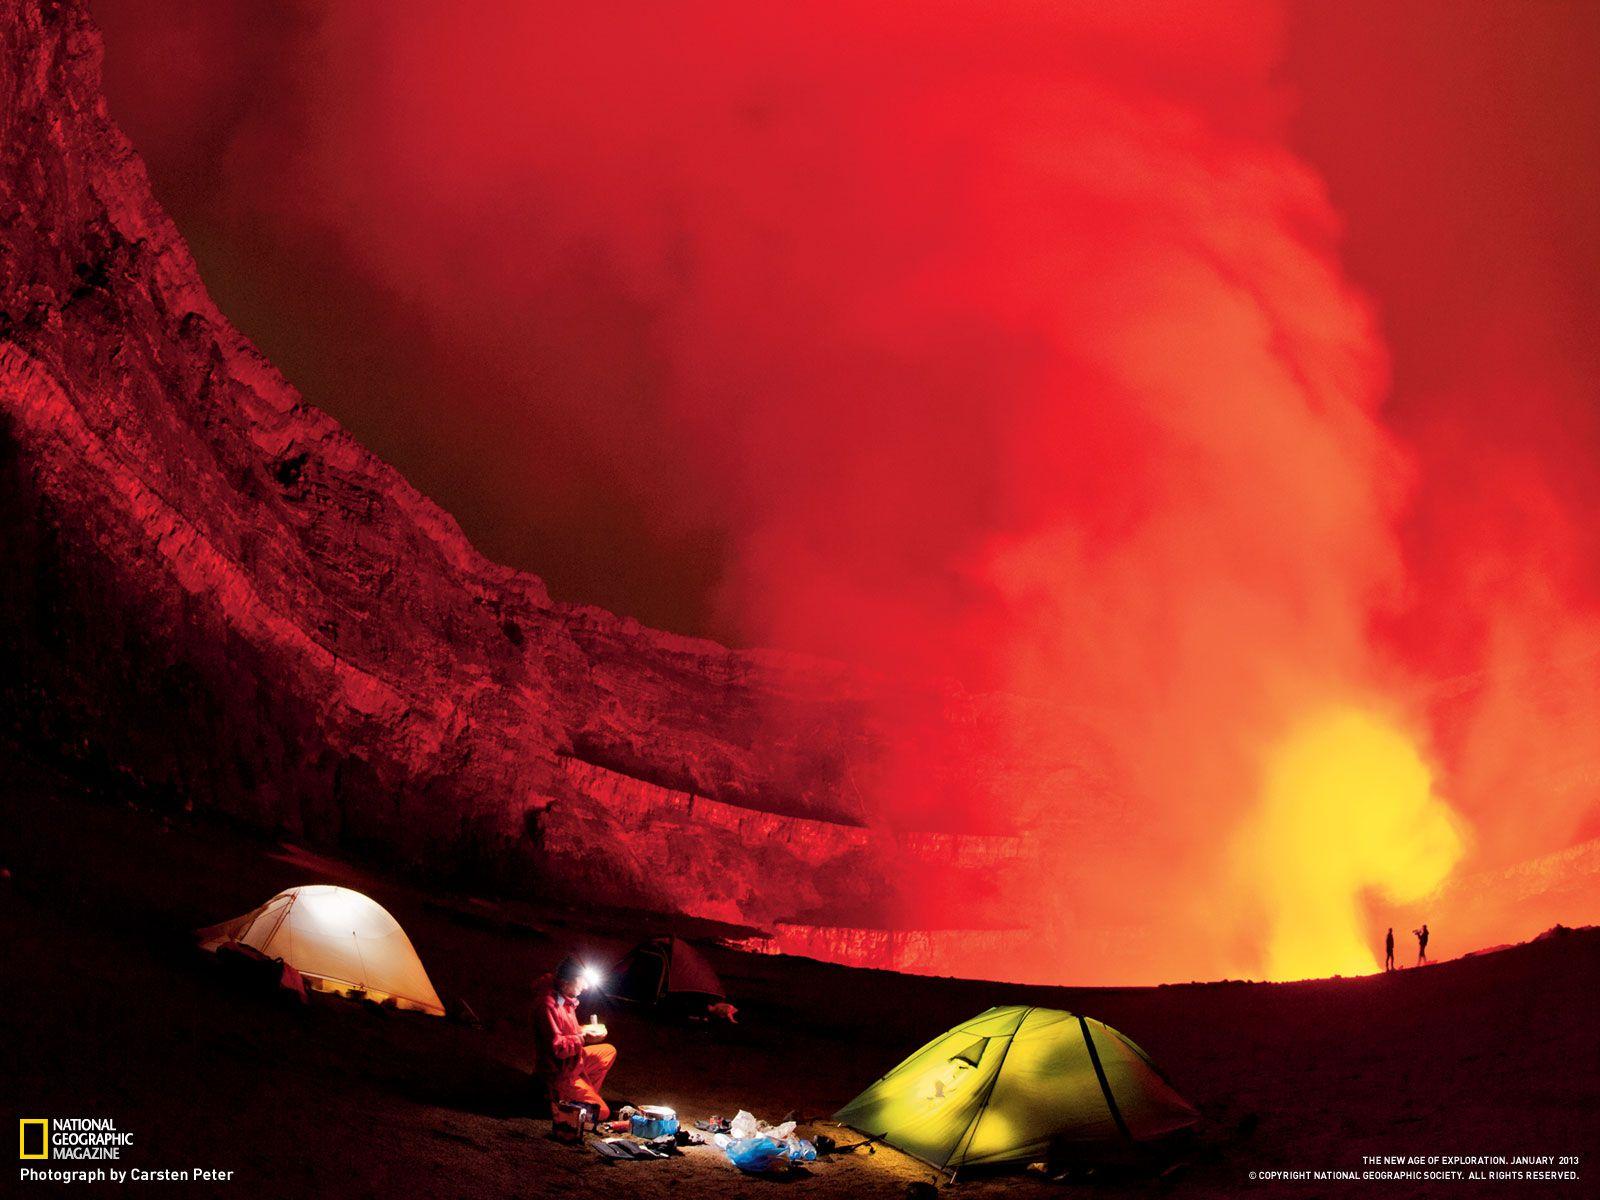 Mount Nyiragongo, Congo. I want to read the whole book, not just a